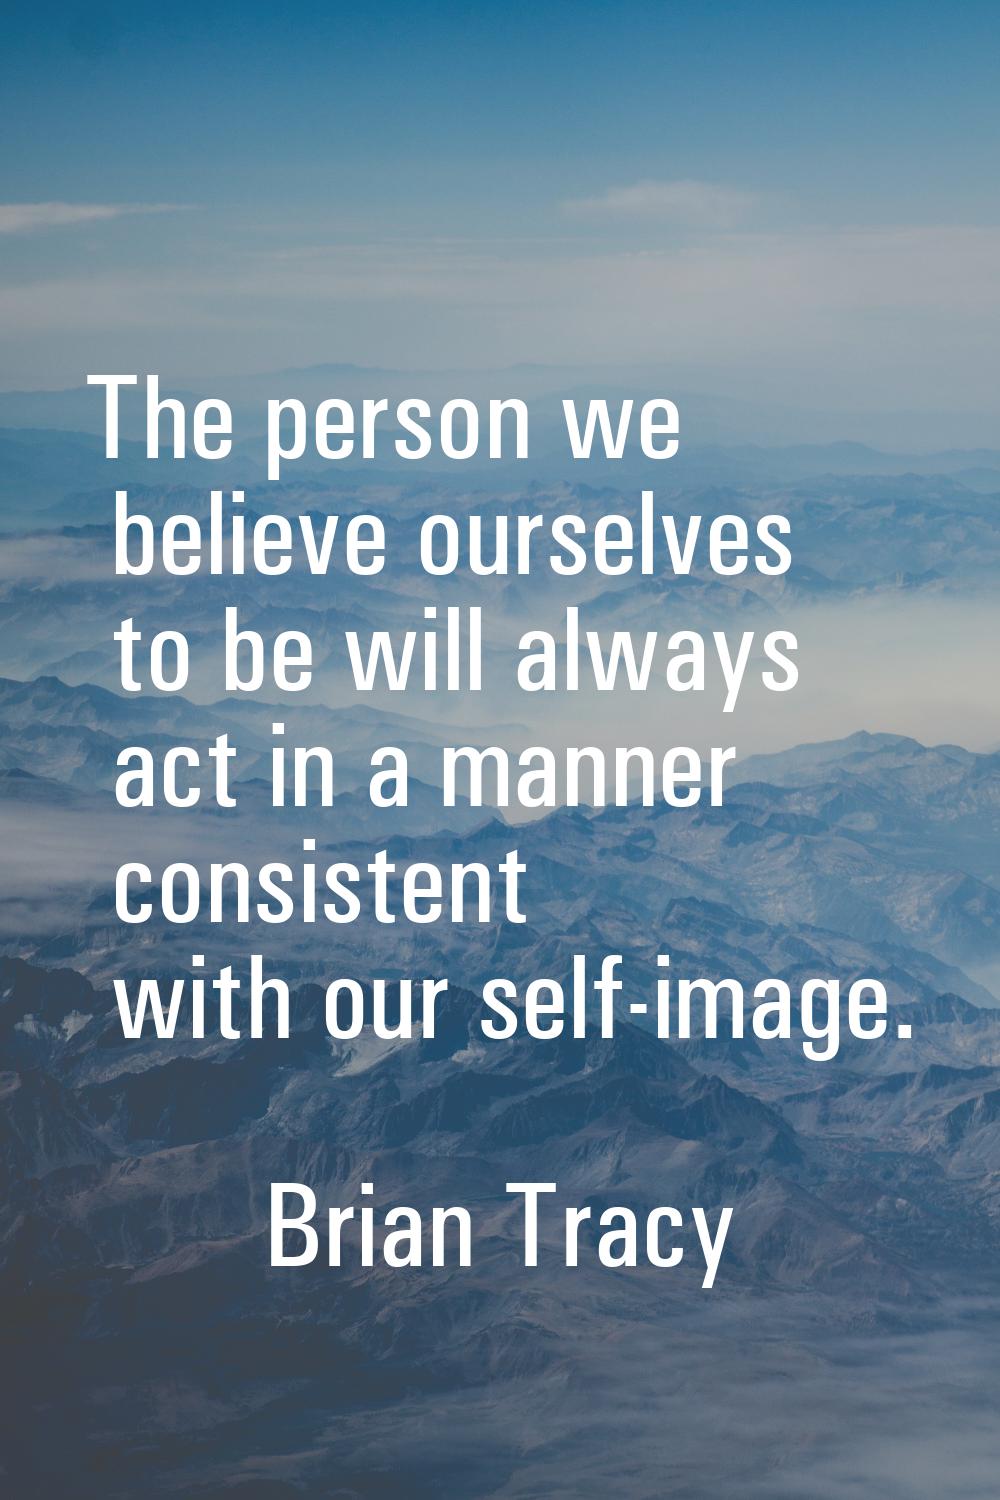 The person we believe ourselves to be will always act in a manner consistent with our self-image.